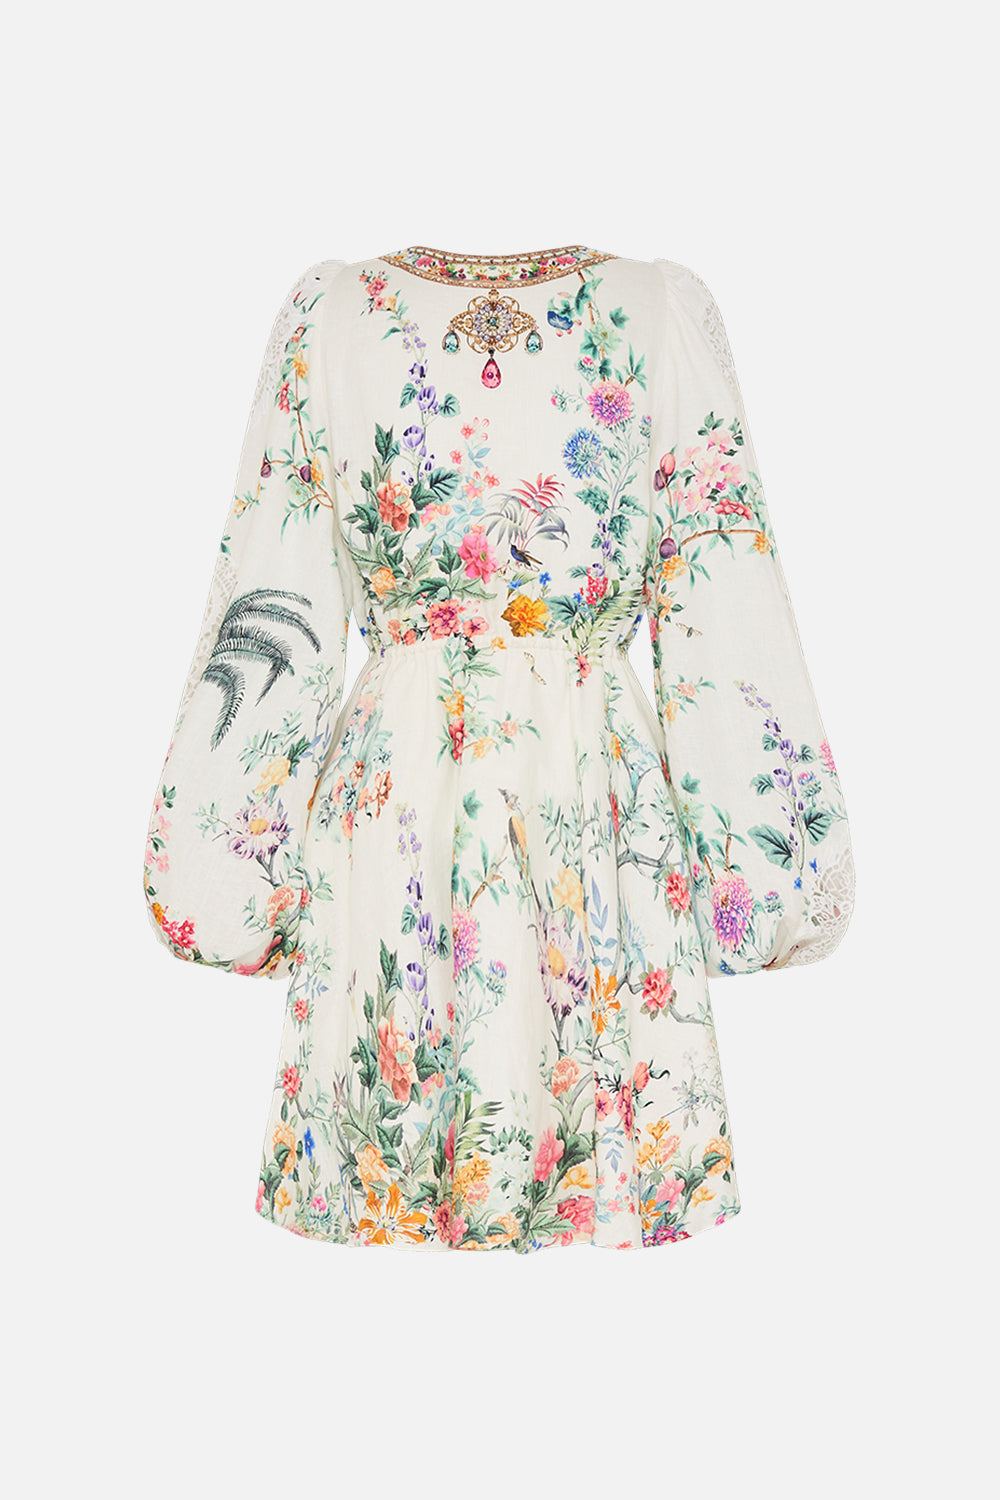 CAMILLA floral wrap dress in Plaumes and Parterres print